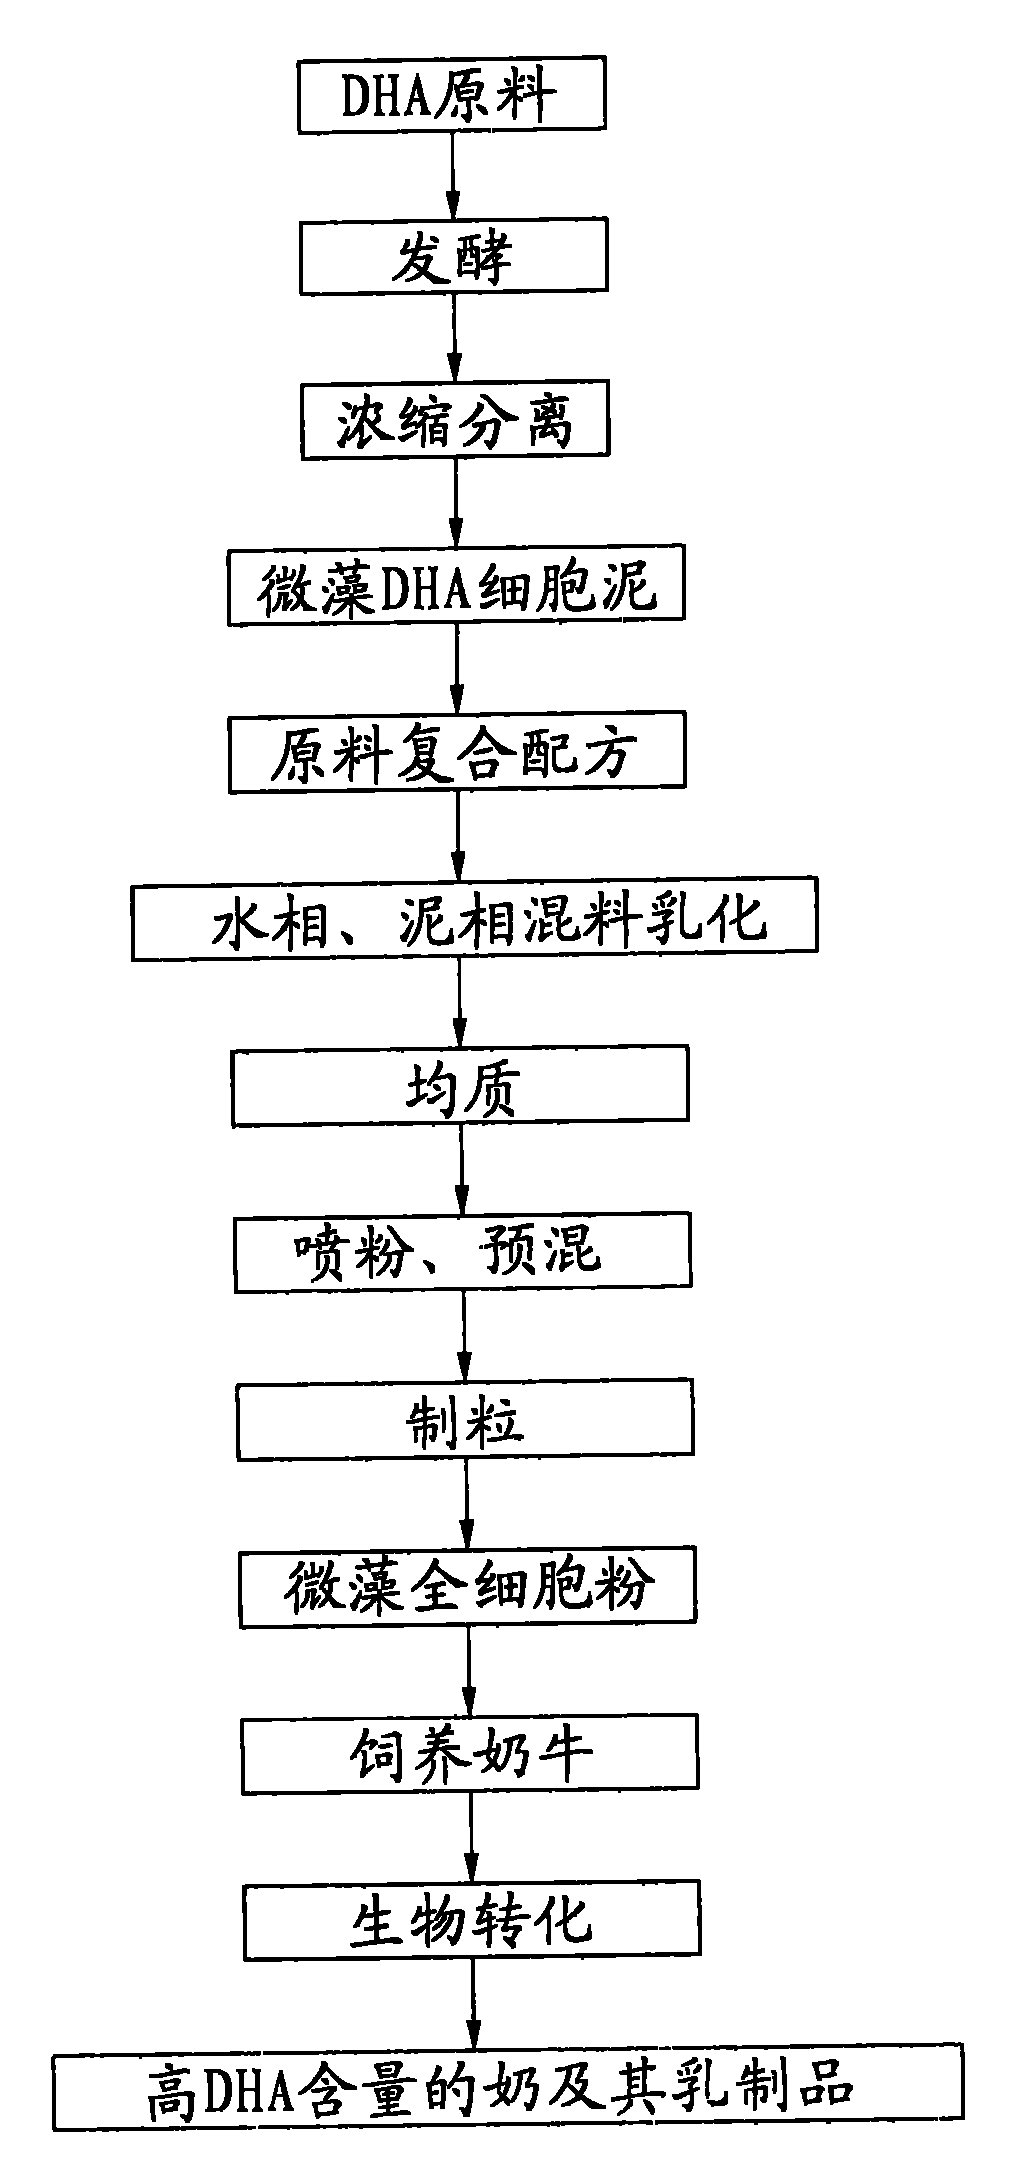 Microalgae whole cell powder for making mammals produce DHA milk in high yield and preparation method thereof